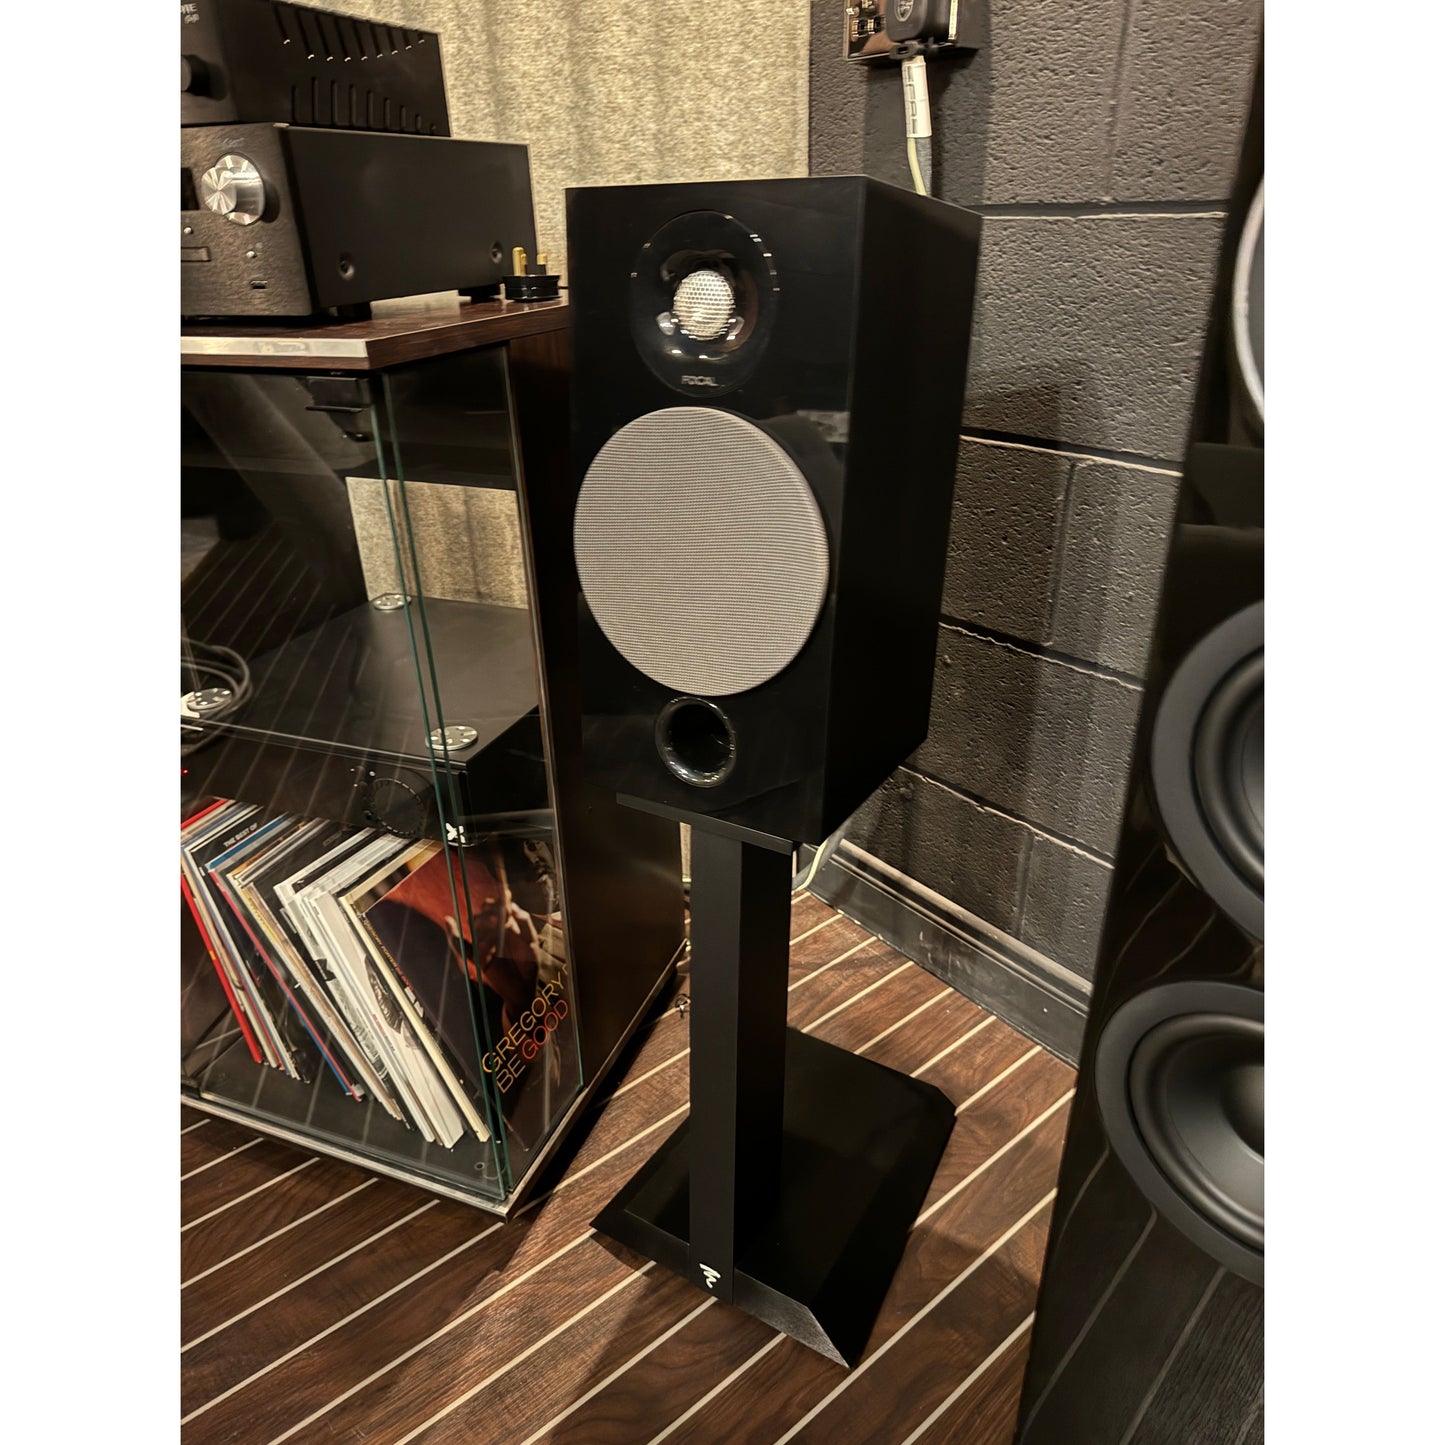 Focal Chora 806 with matching stands - Black (USED)